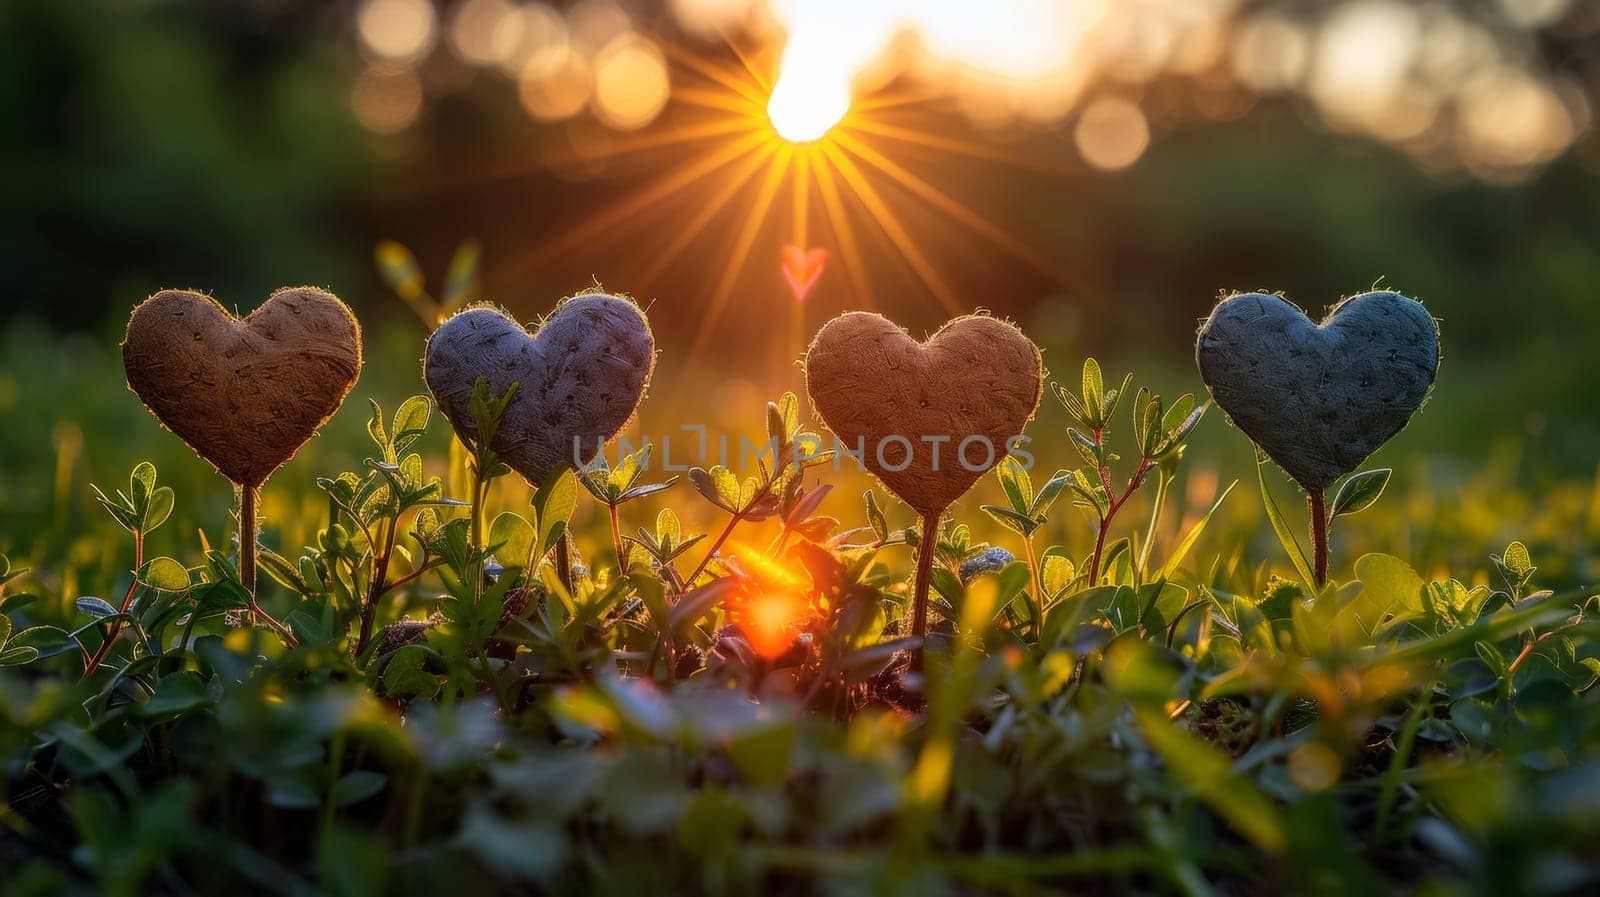 Three heart shaped cookies are sitting in the grass with a sun setting behind them, AI by starush